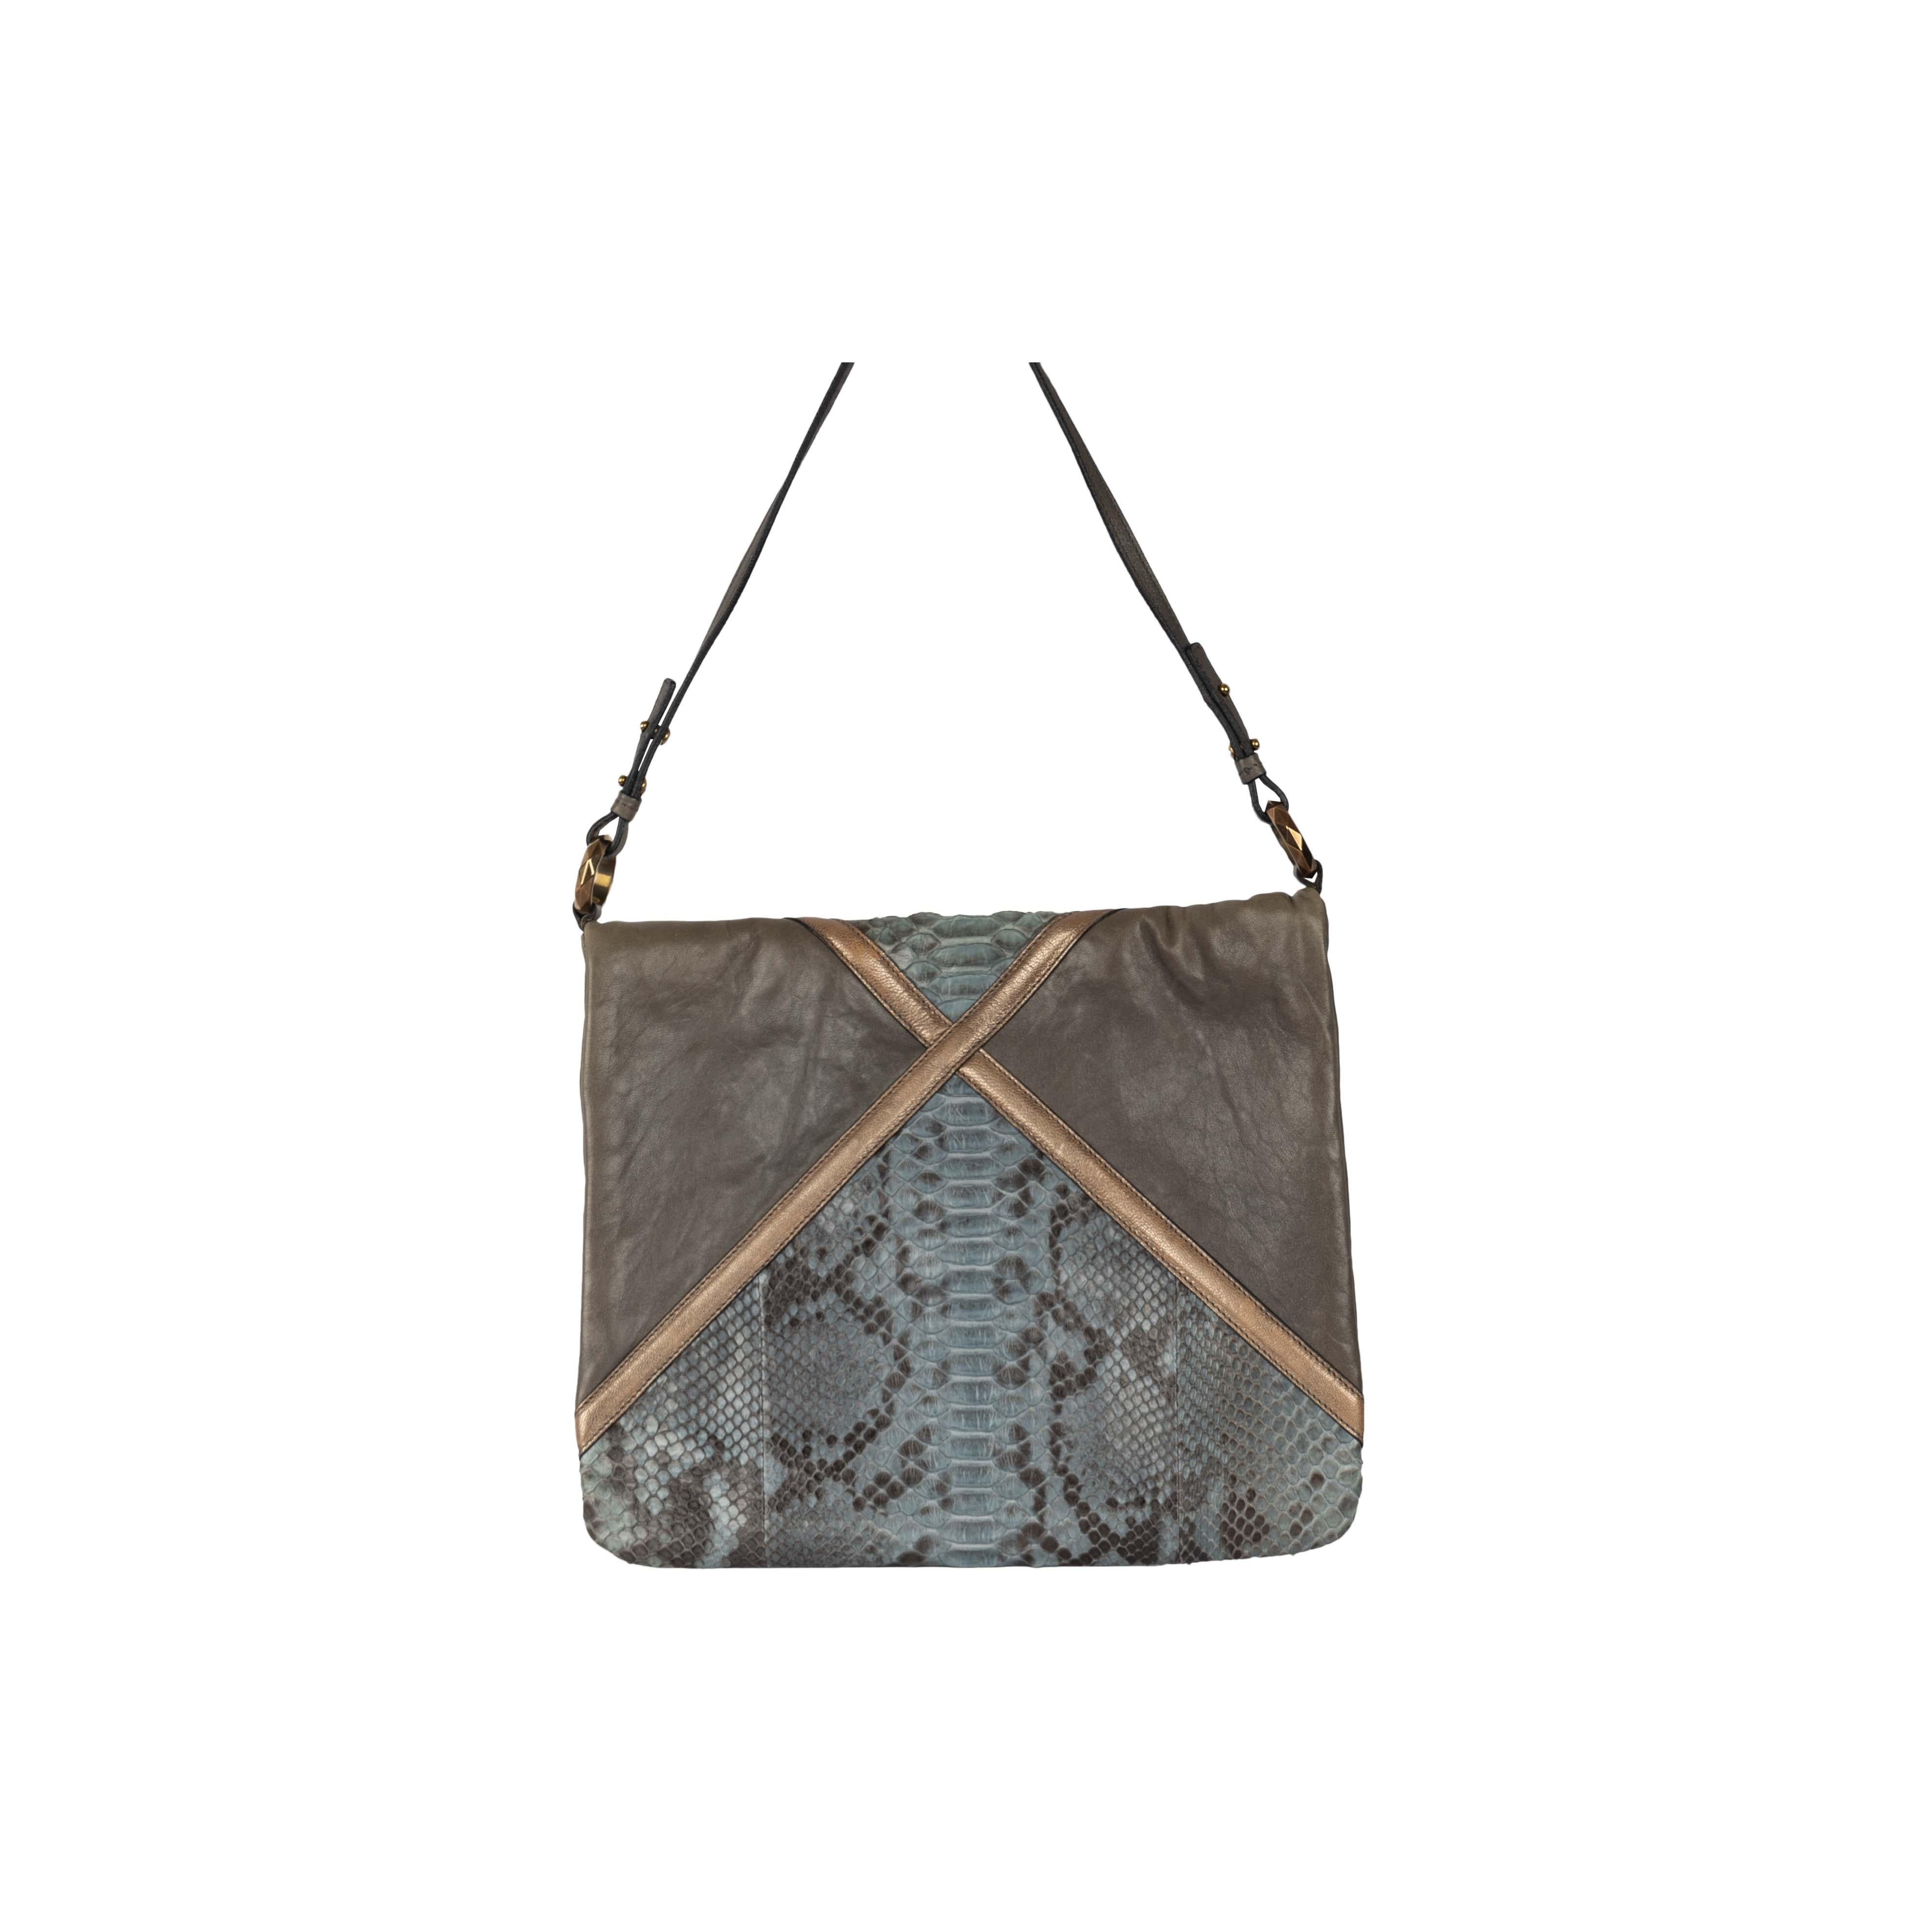 The Chloe Snakeskin Envelope Bag is a textural masterpiece with a unique combination of grey leather, snakeskin leather, and a bronze ribbon separating them and creating a symmetrical illusion. The bag can be closed with a snap